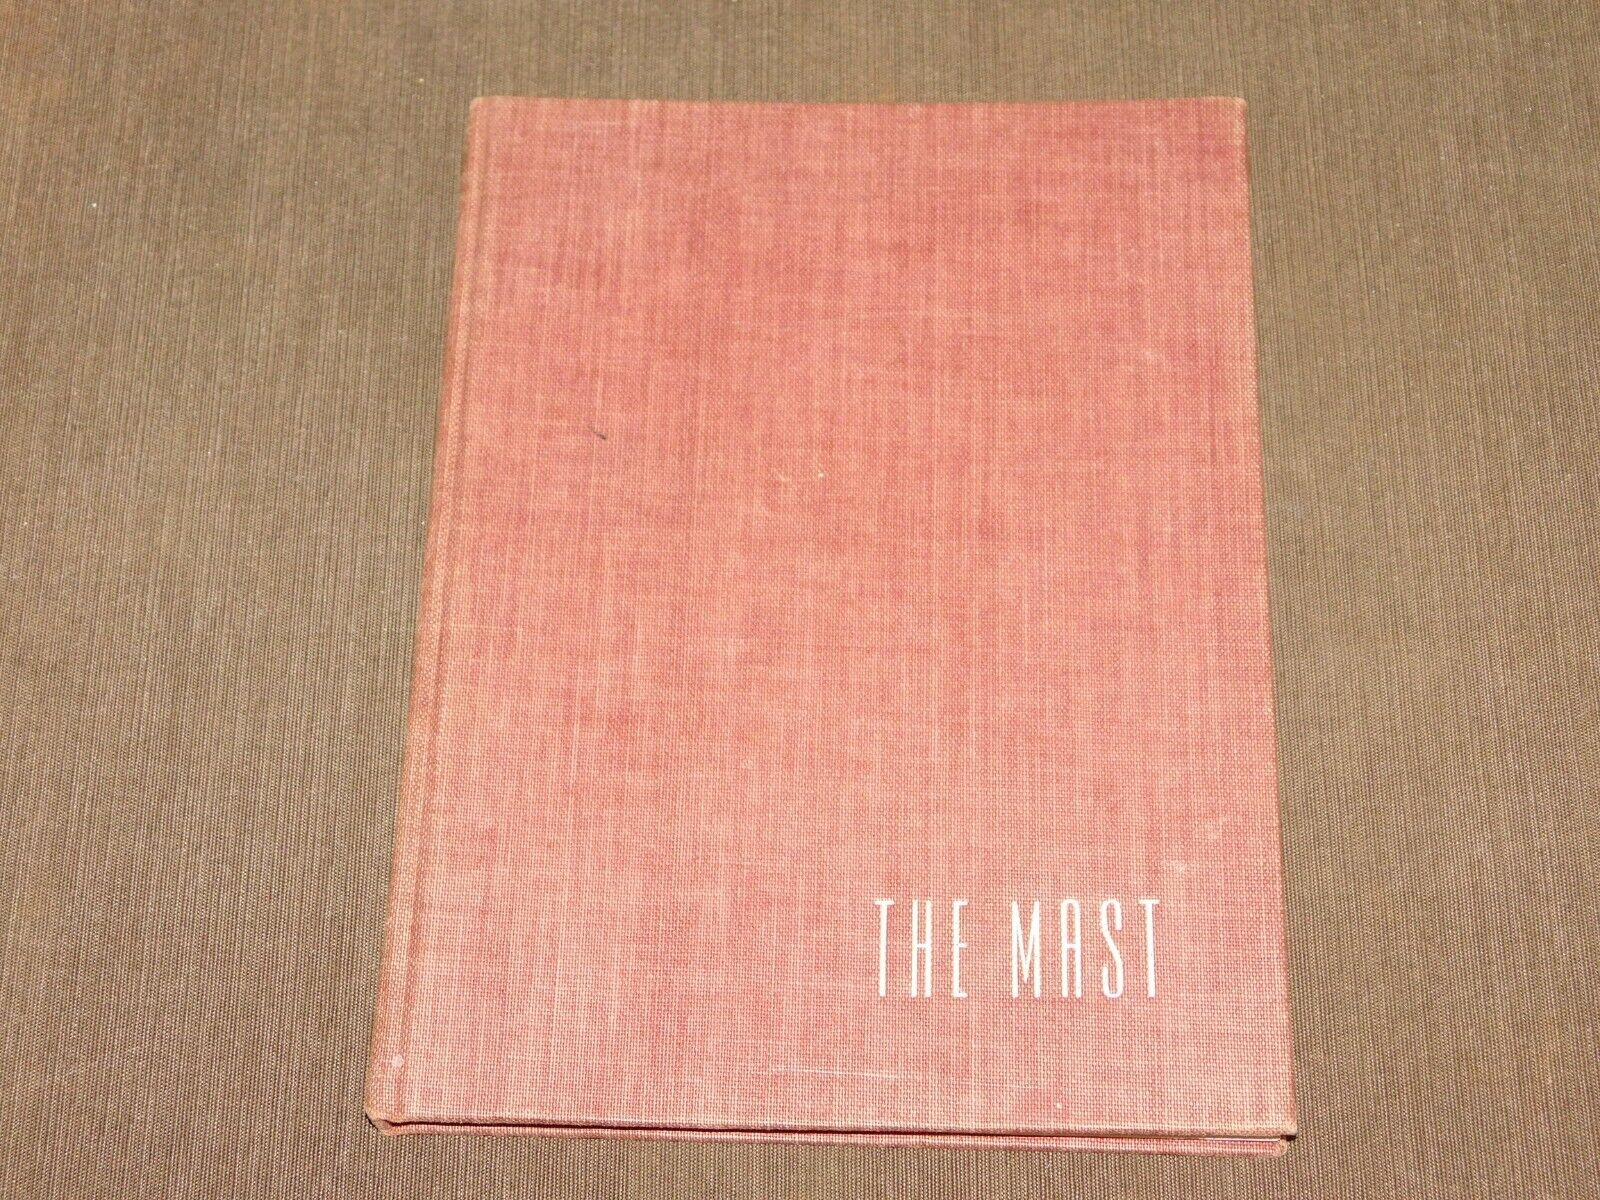 VINTAGE 1943 THE MAST GARDEN CITY NY HIGH SCHOOL YEARBOOK W/ AUTOGRAPHS